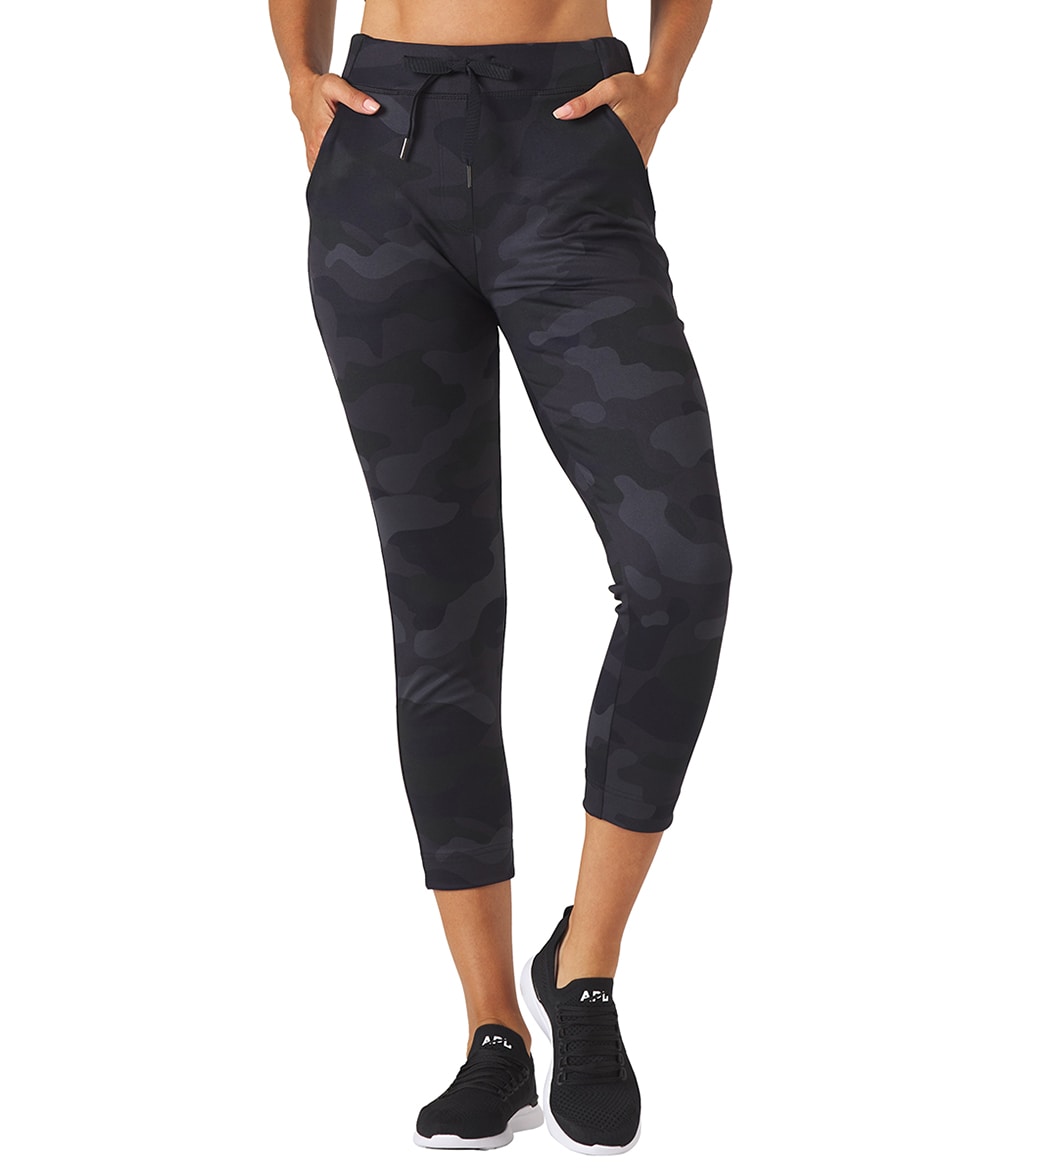 Glyder Jet Set Crop Joggers at SwimOutlet.com - Free Shipping